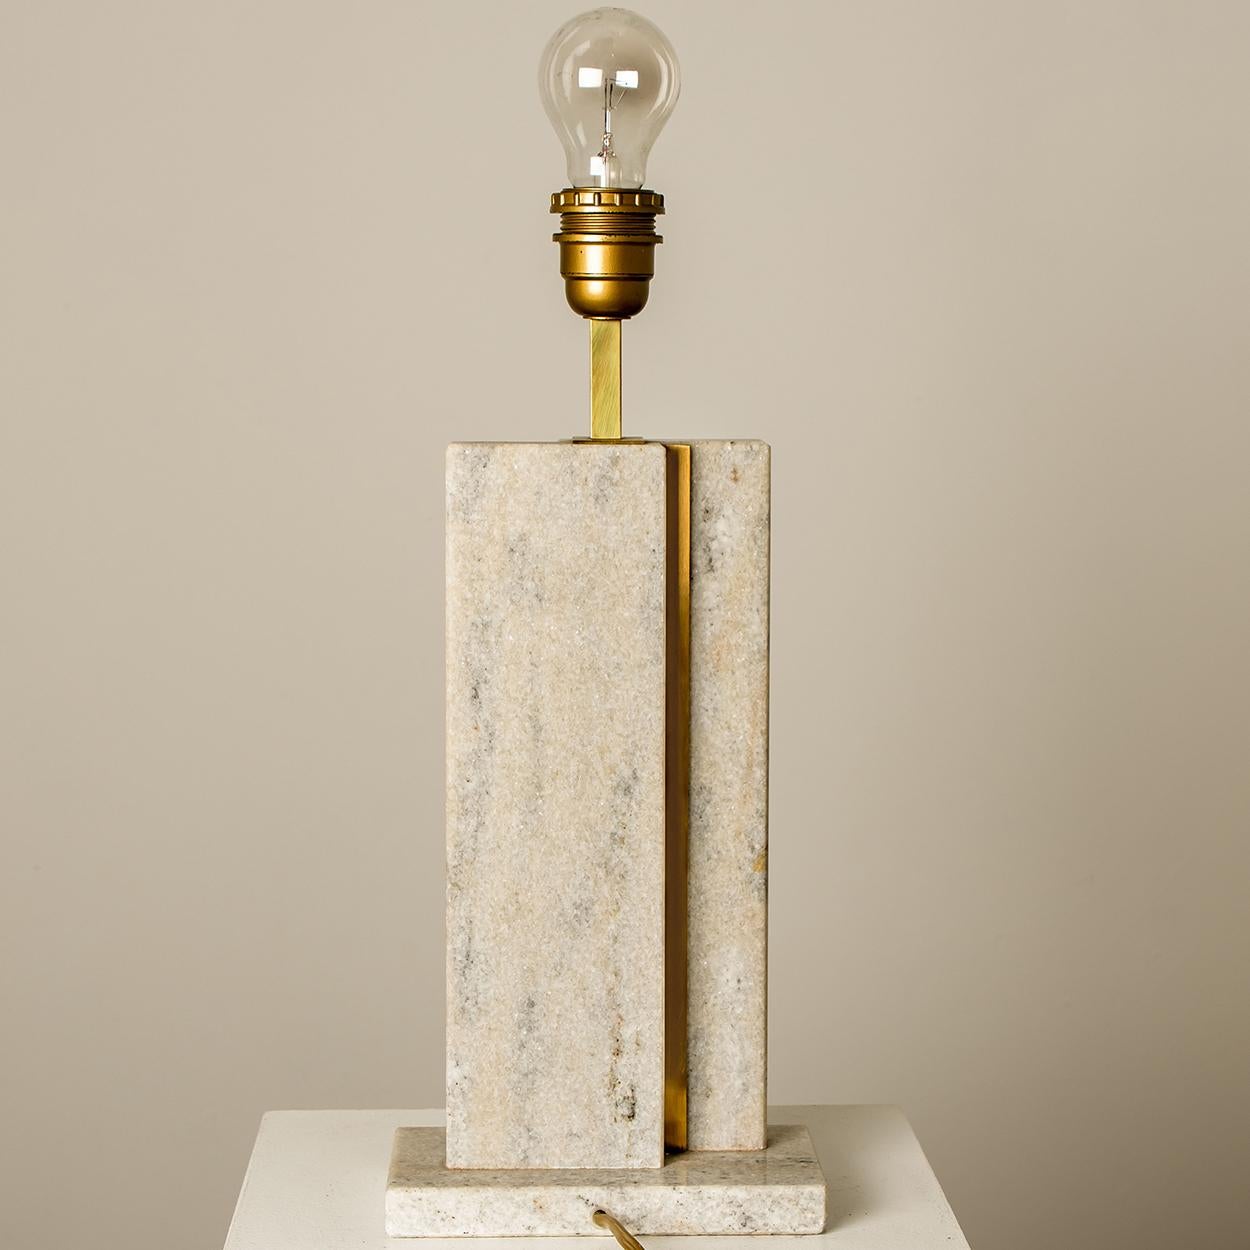 Camille Breesch Travertine Table Lamp with New Shade For Sale 3